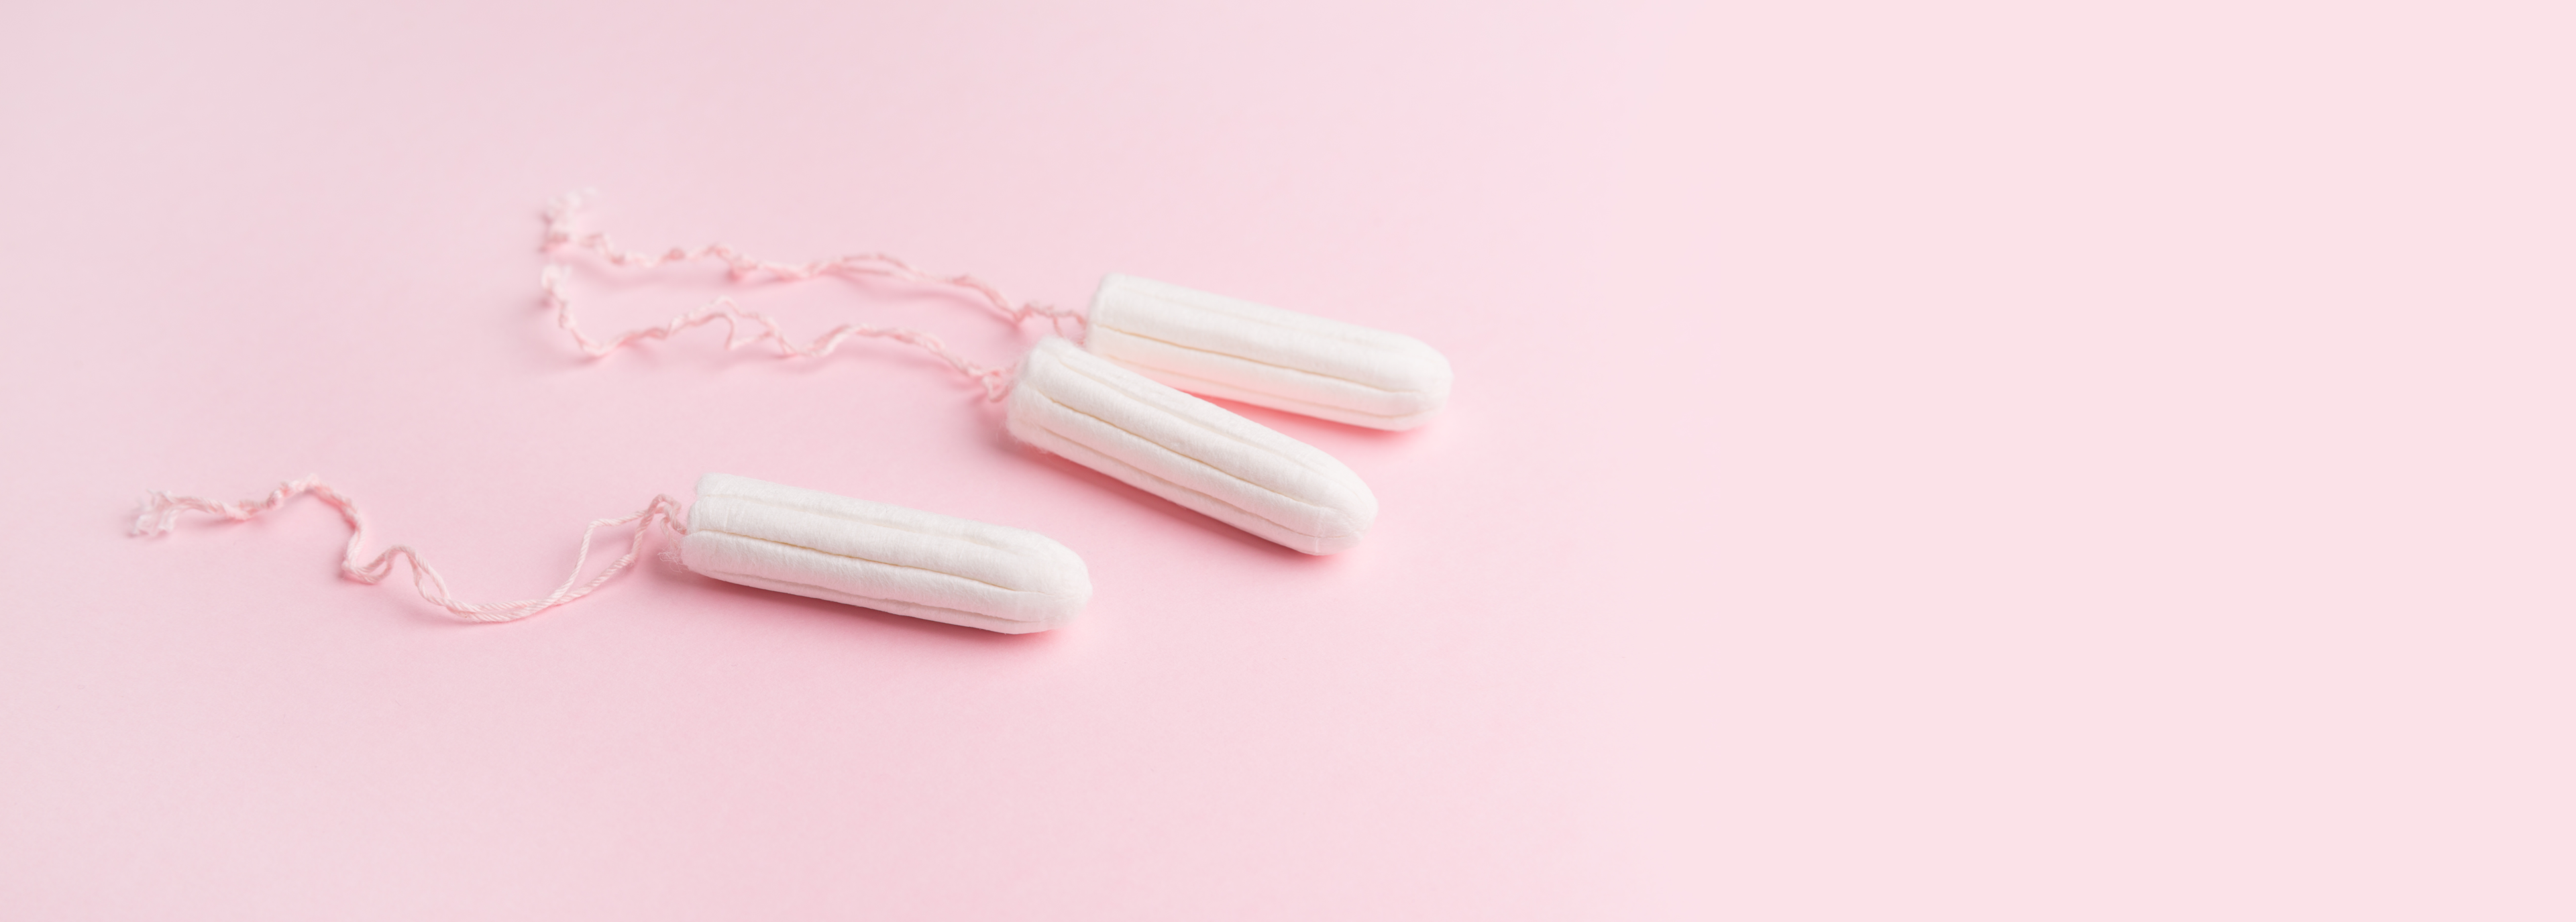 The string of a tampon can cause a problem during urination.